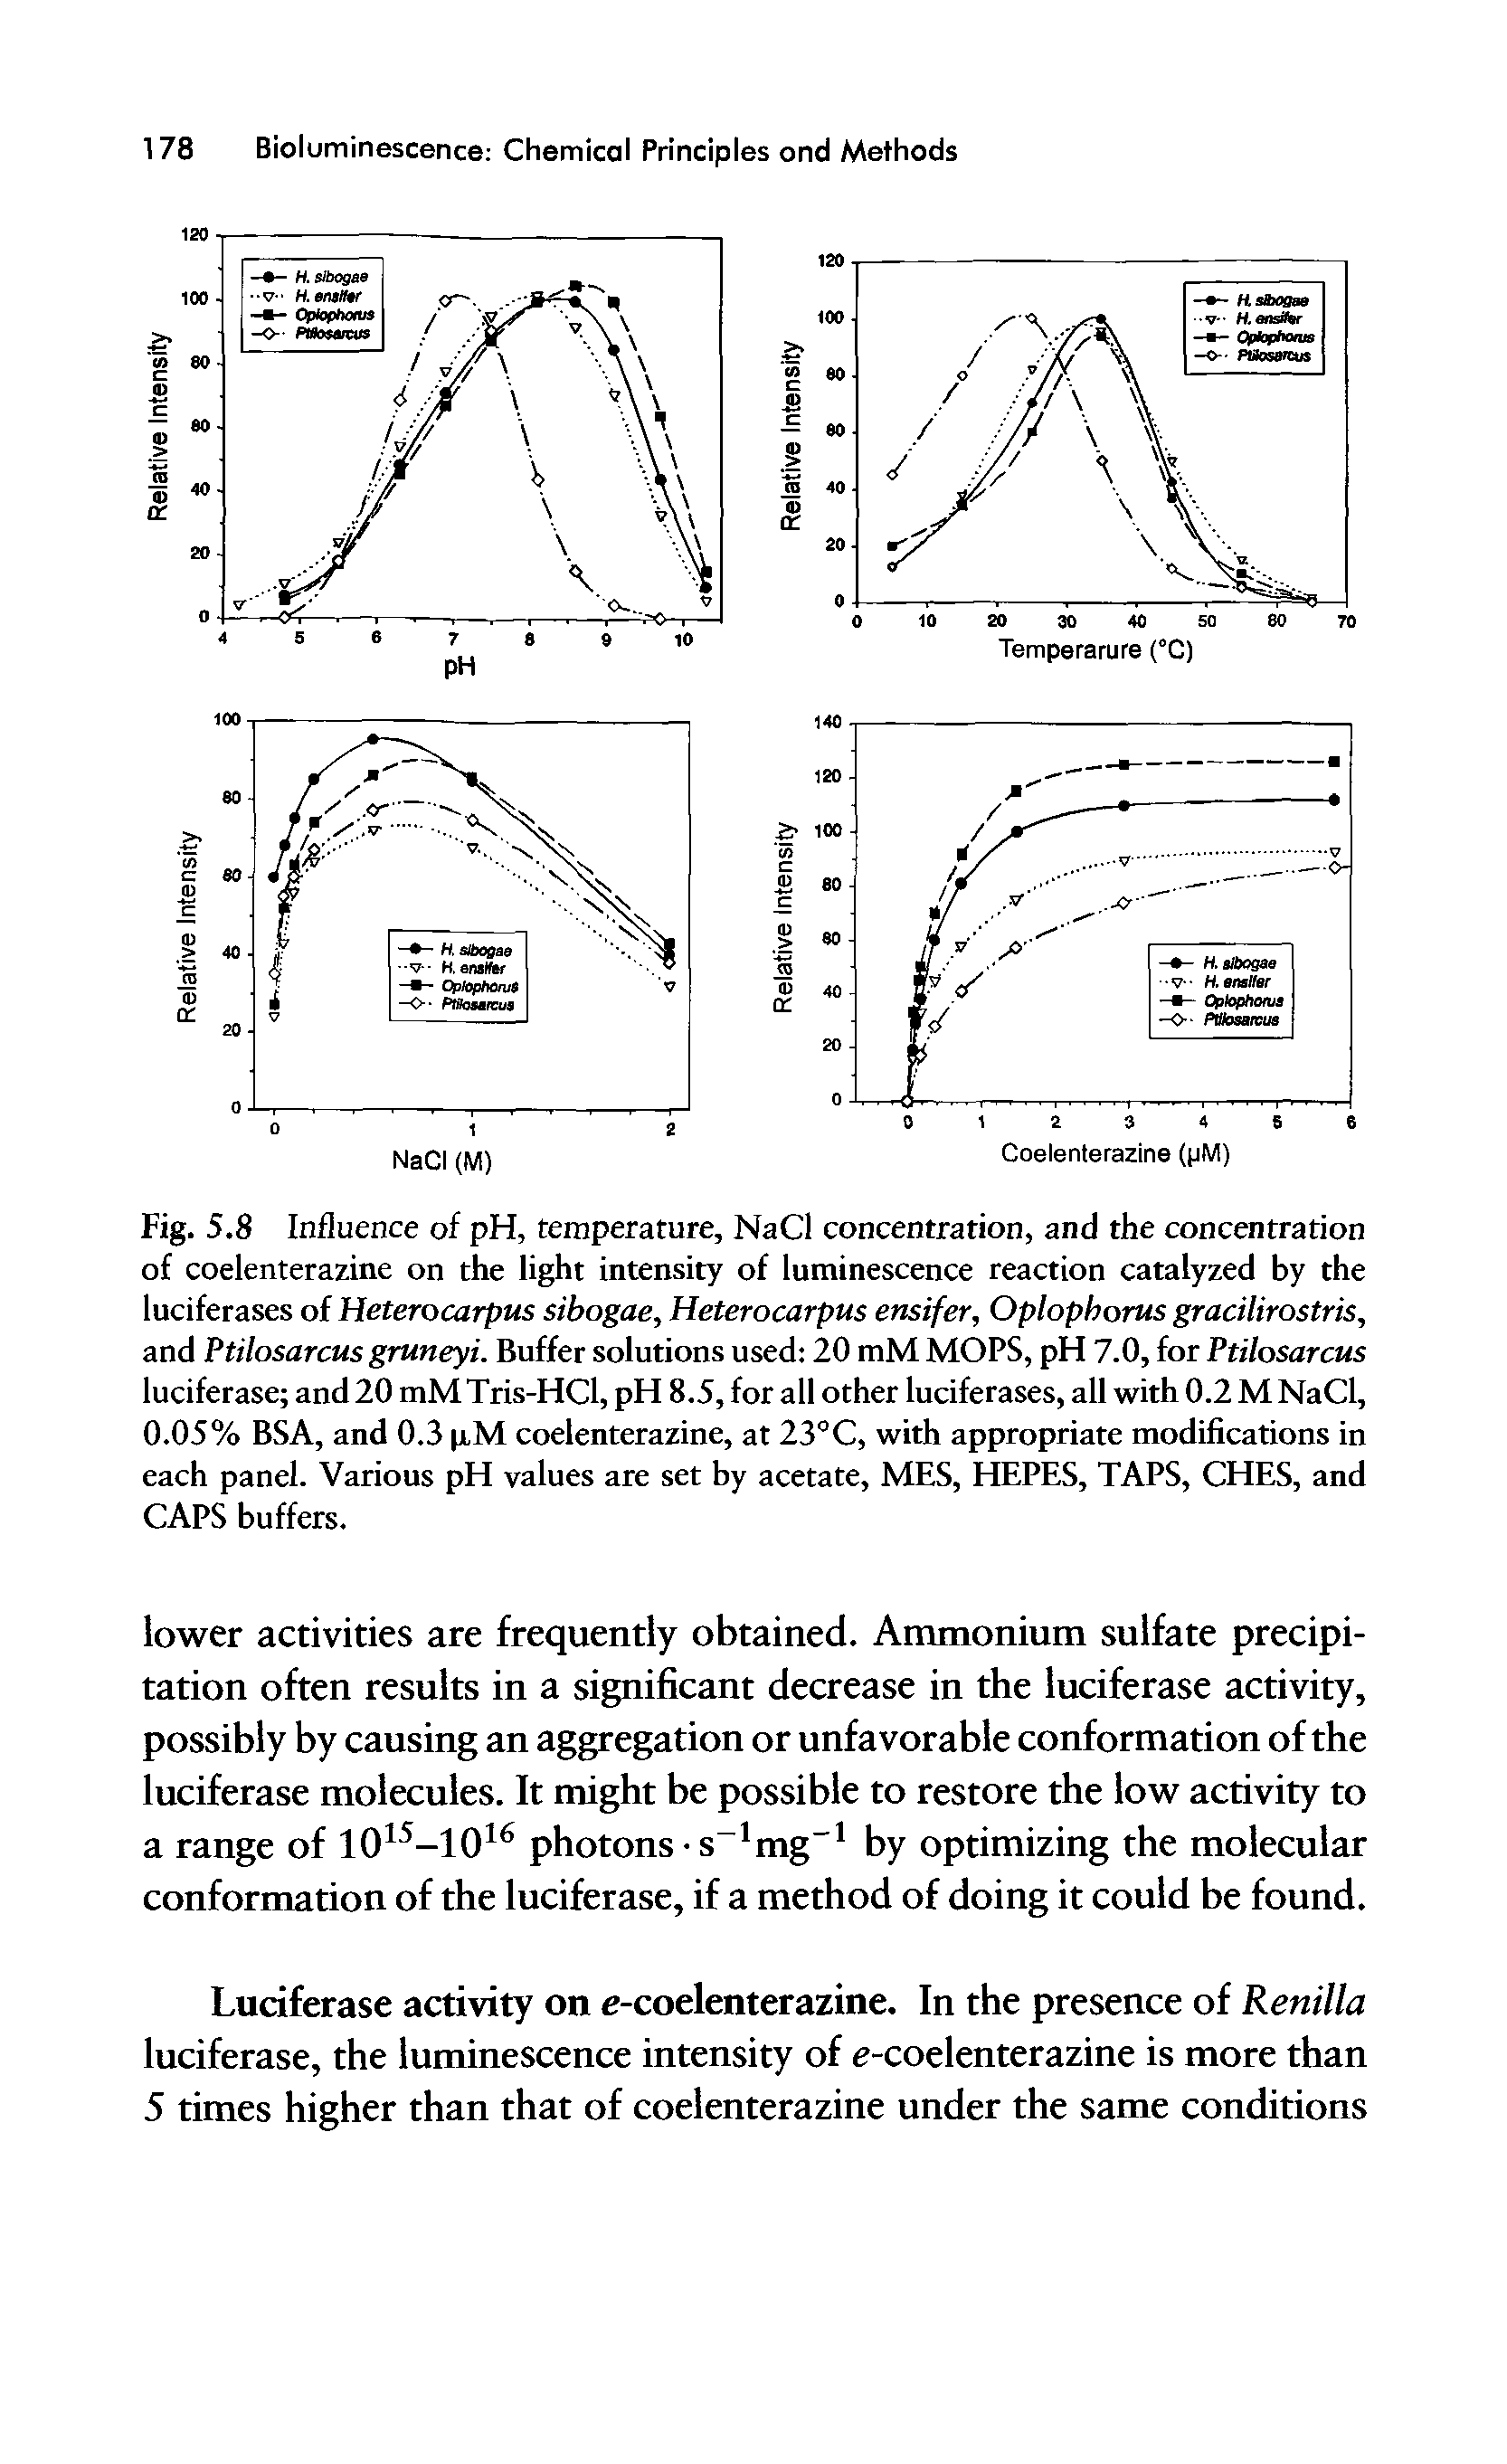 Fig. 5.8 Influence of pH, temperature, NaCl concentration, and the concentration of coelenterazine on the light intensity of luminescence reaction catalyzed by the luciferases of Heterocarpus sibogae, Heterocarpus ensifer, Oplophorus gracilirostris, and Ptilosarcus gruneyi. Buffer solutions used 20 mM MOPS, pH 7.0, for Ptilosarcus luciferase and 20 mM Tris-HCl, pH 8.5, for all other luciferases, all with 0.2 M NaCl, 0.05% BSA, and 0.3 p,M coelenterazine, at 23°C, with appropriate modifications in each panel. Various pH values are set by acetate, MES, HEPES, TAPS, CHES, and CAPS buffers.